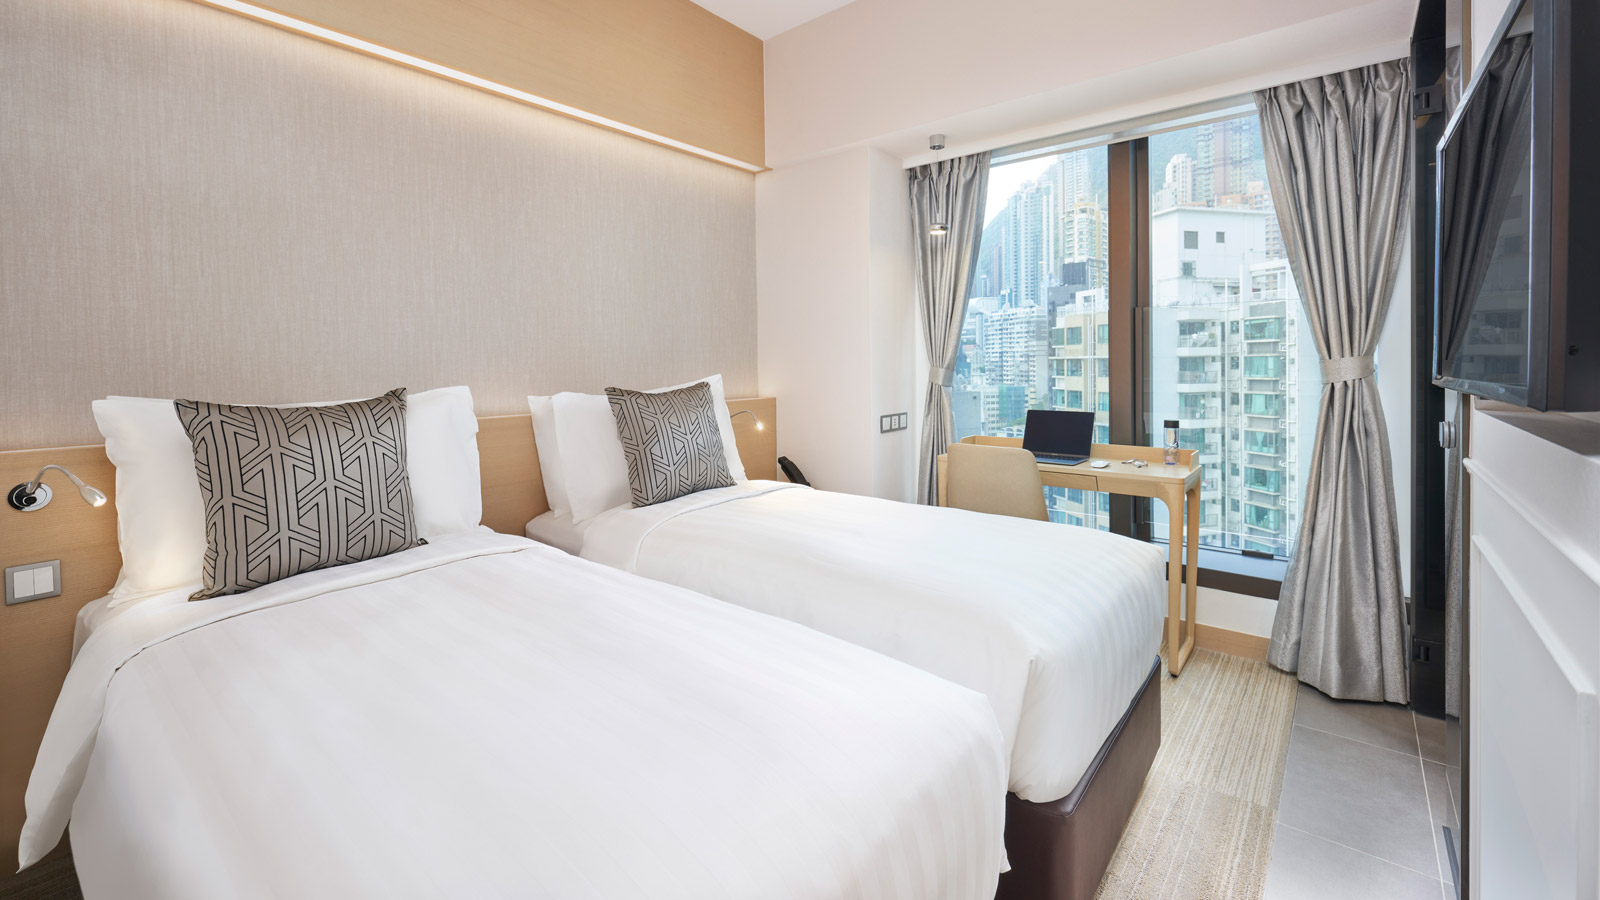 Deluxe Twin - Y Hotel Hong Kong (Images are a visual preview and may vary) - Y Hotel Hong Kong